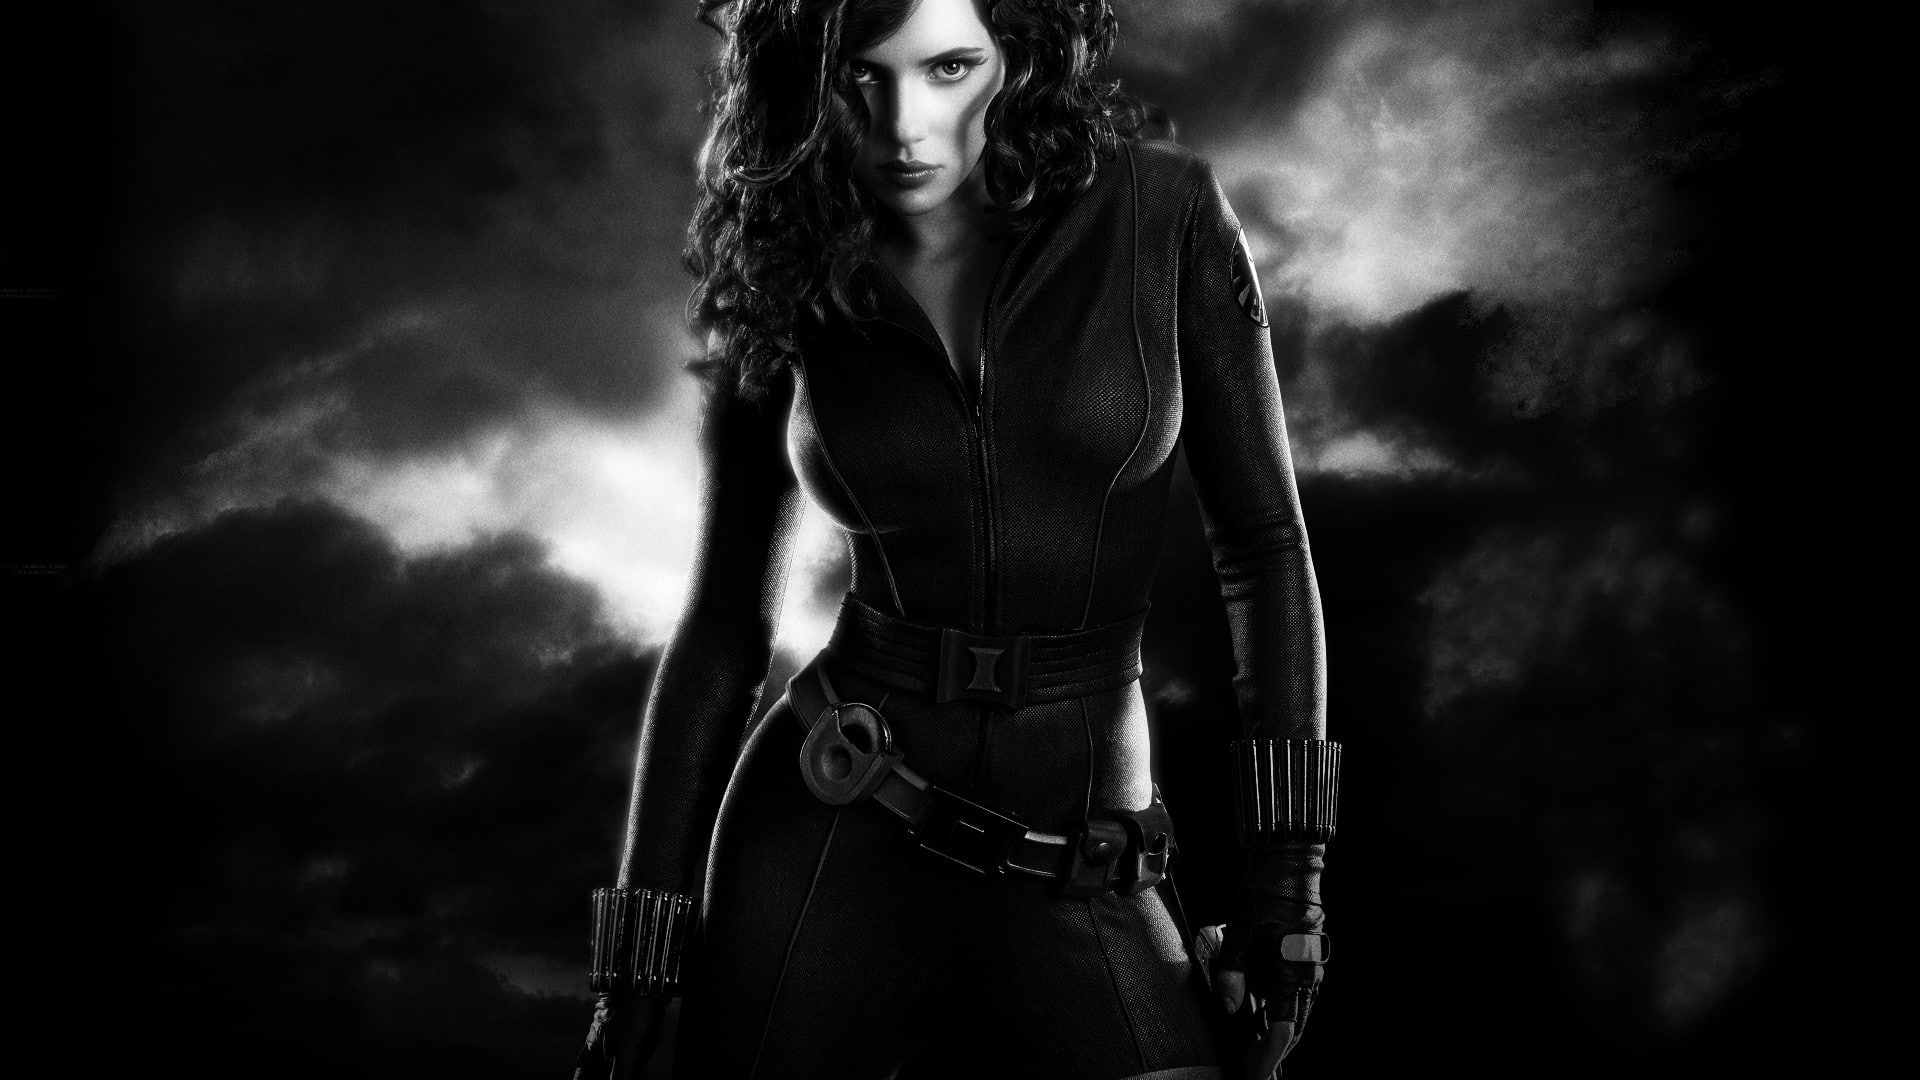 Iron man 2 Black widow, grayscale photo of woman in suit, black and white